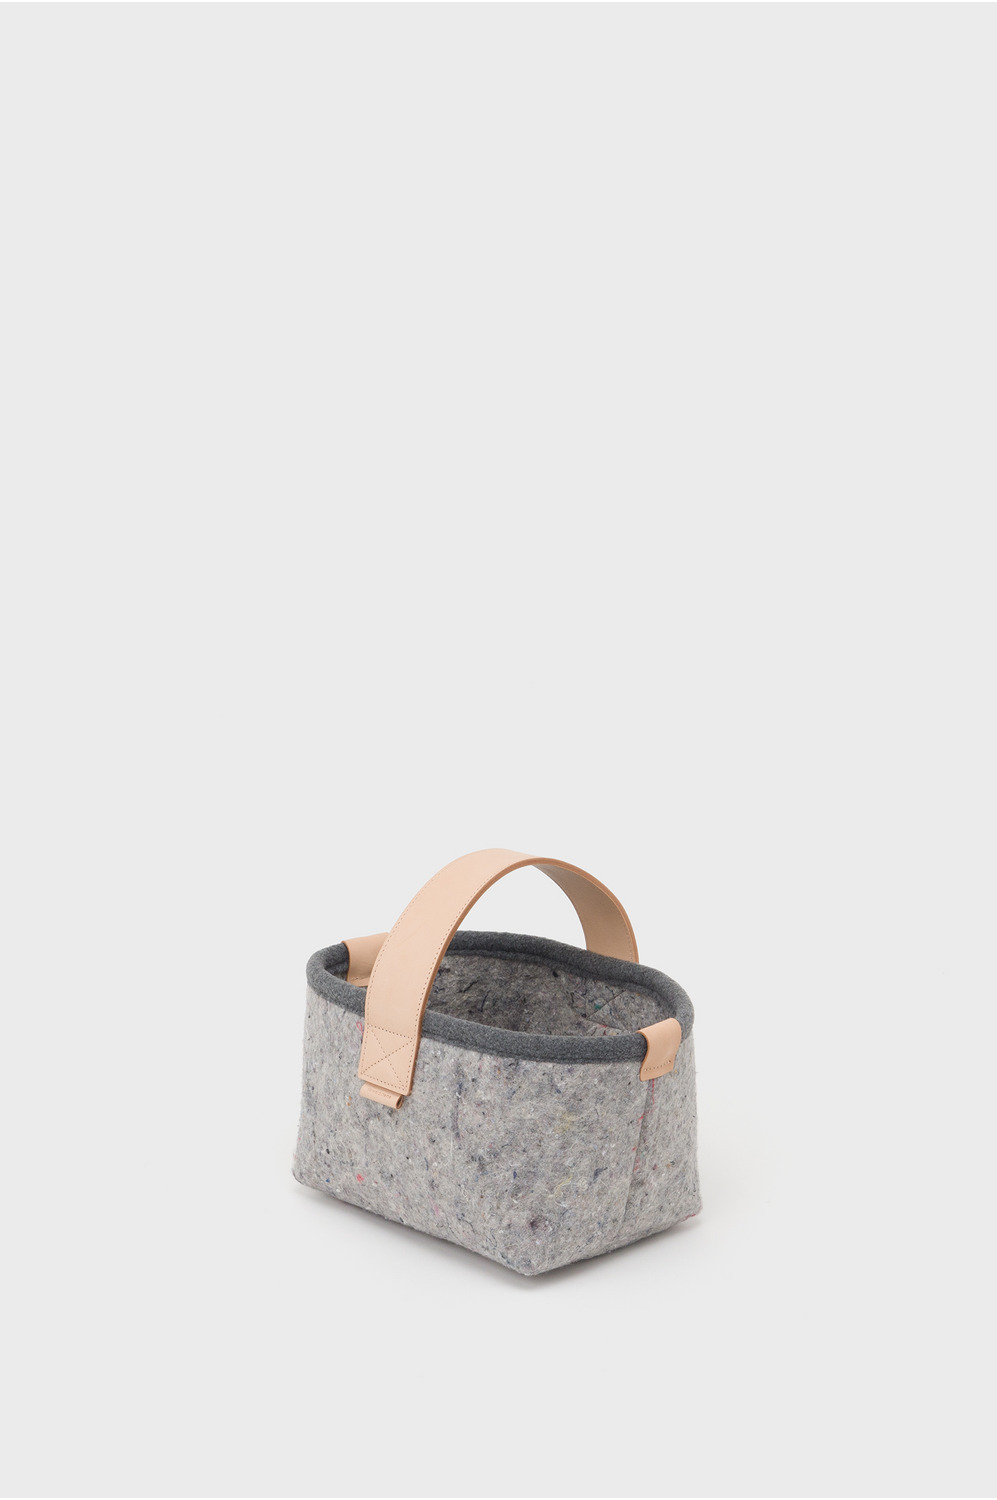 Recycled felt) one strap bag small 詳細画像 mix gray/natural 2